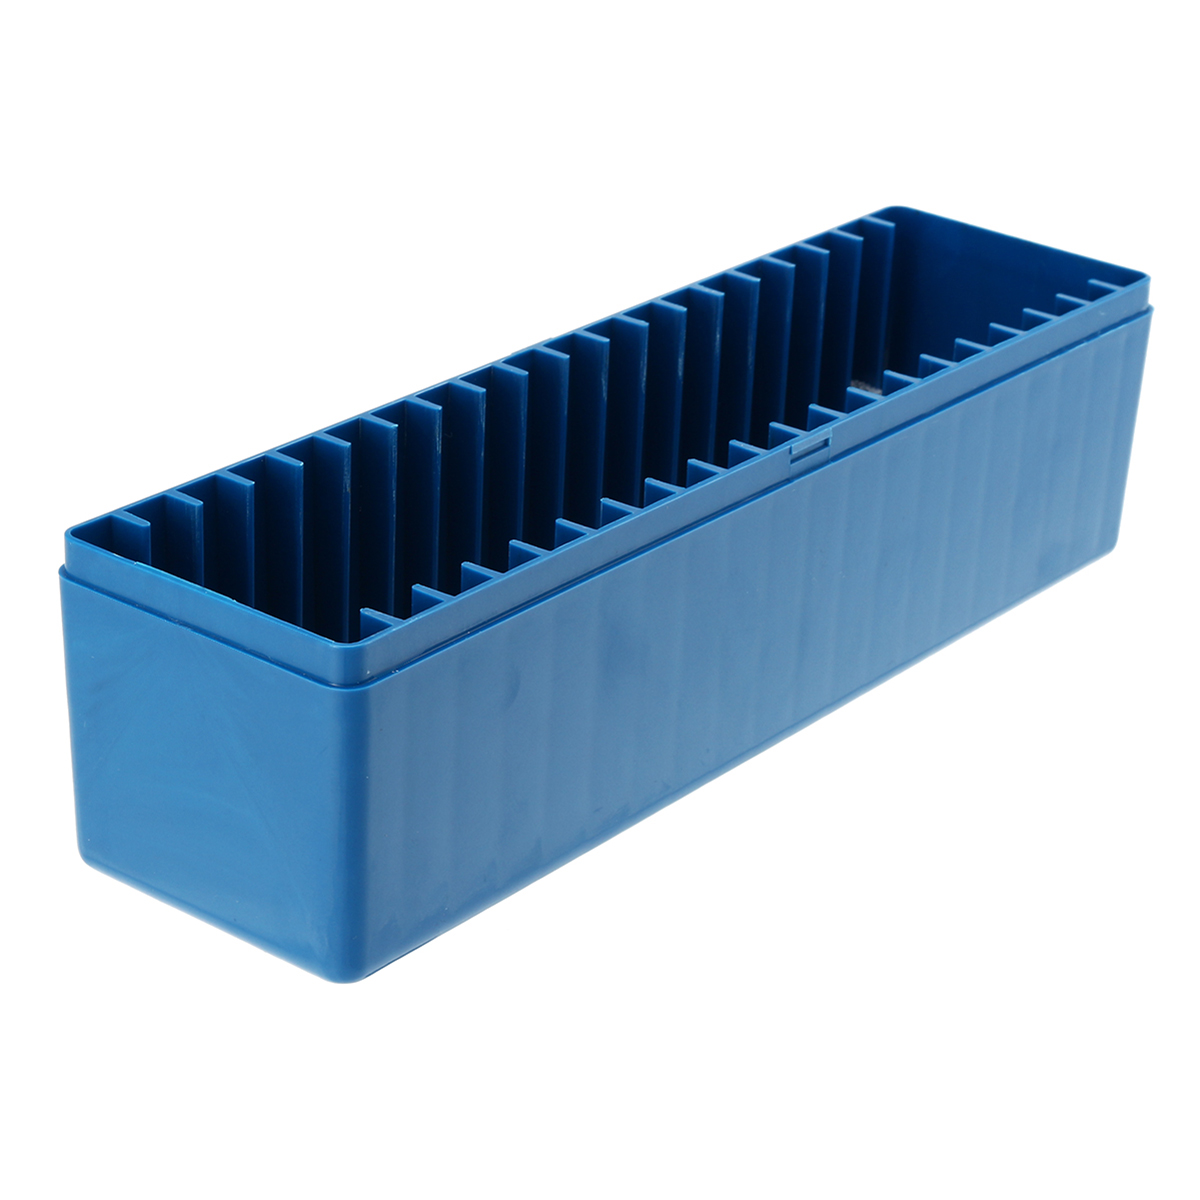 25x9x7cm-Blue-Storage-Tool-Box-Case-Holds-20-Individual-Certified-PCGS-NGC-ICG-Coin-Holders-1425243-8